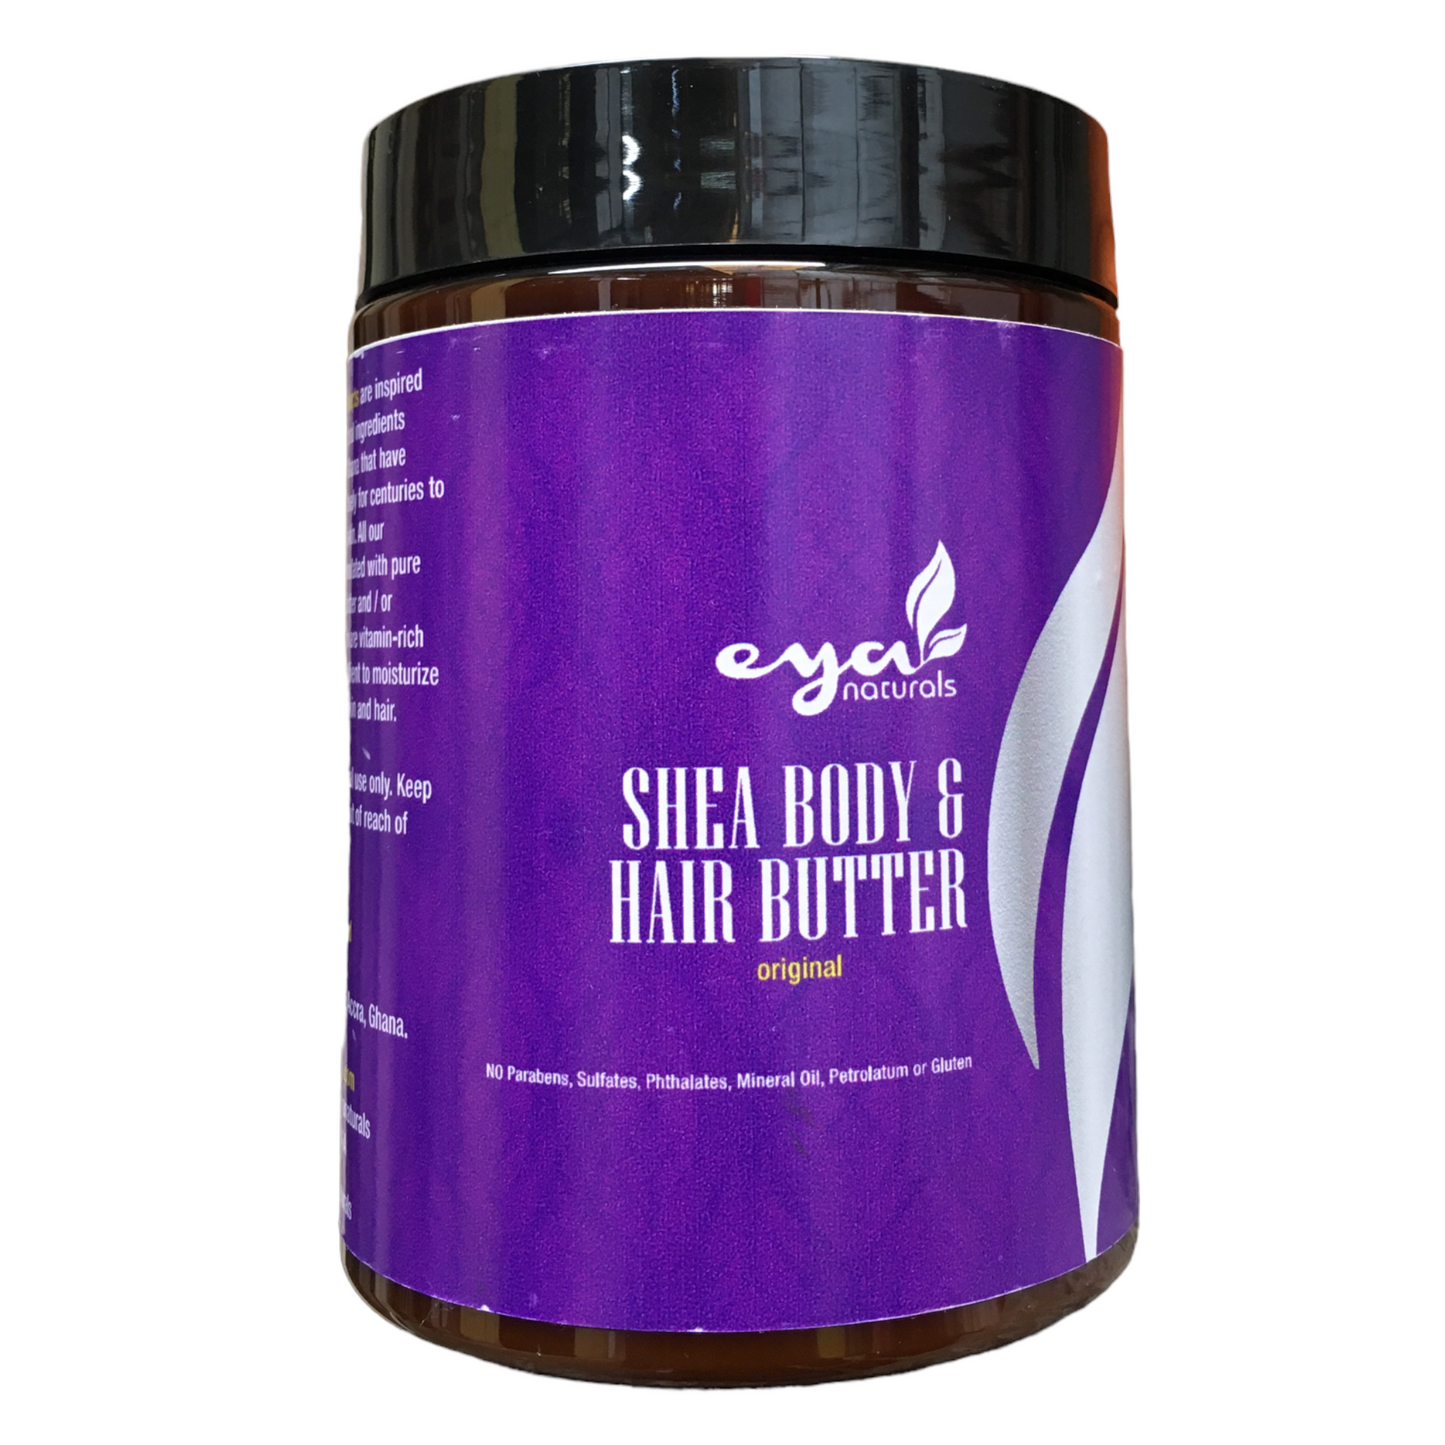 SHEA BODY AND HAIR BUTTER